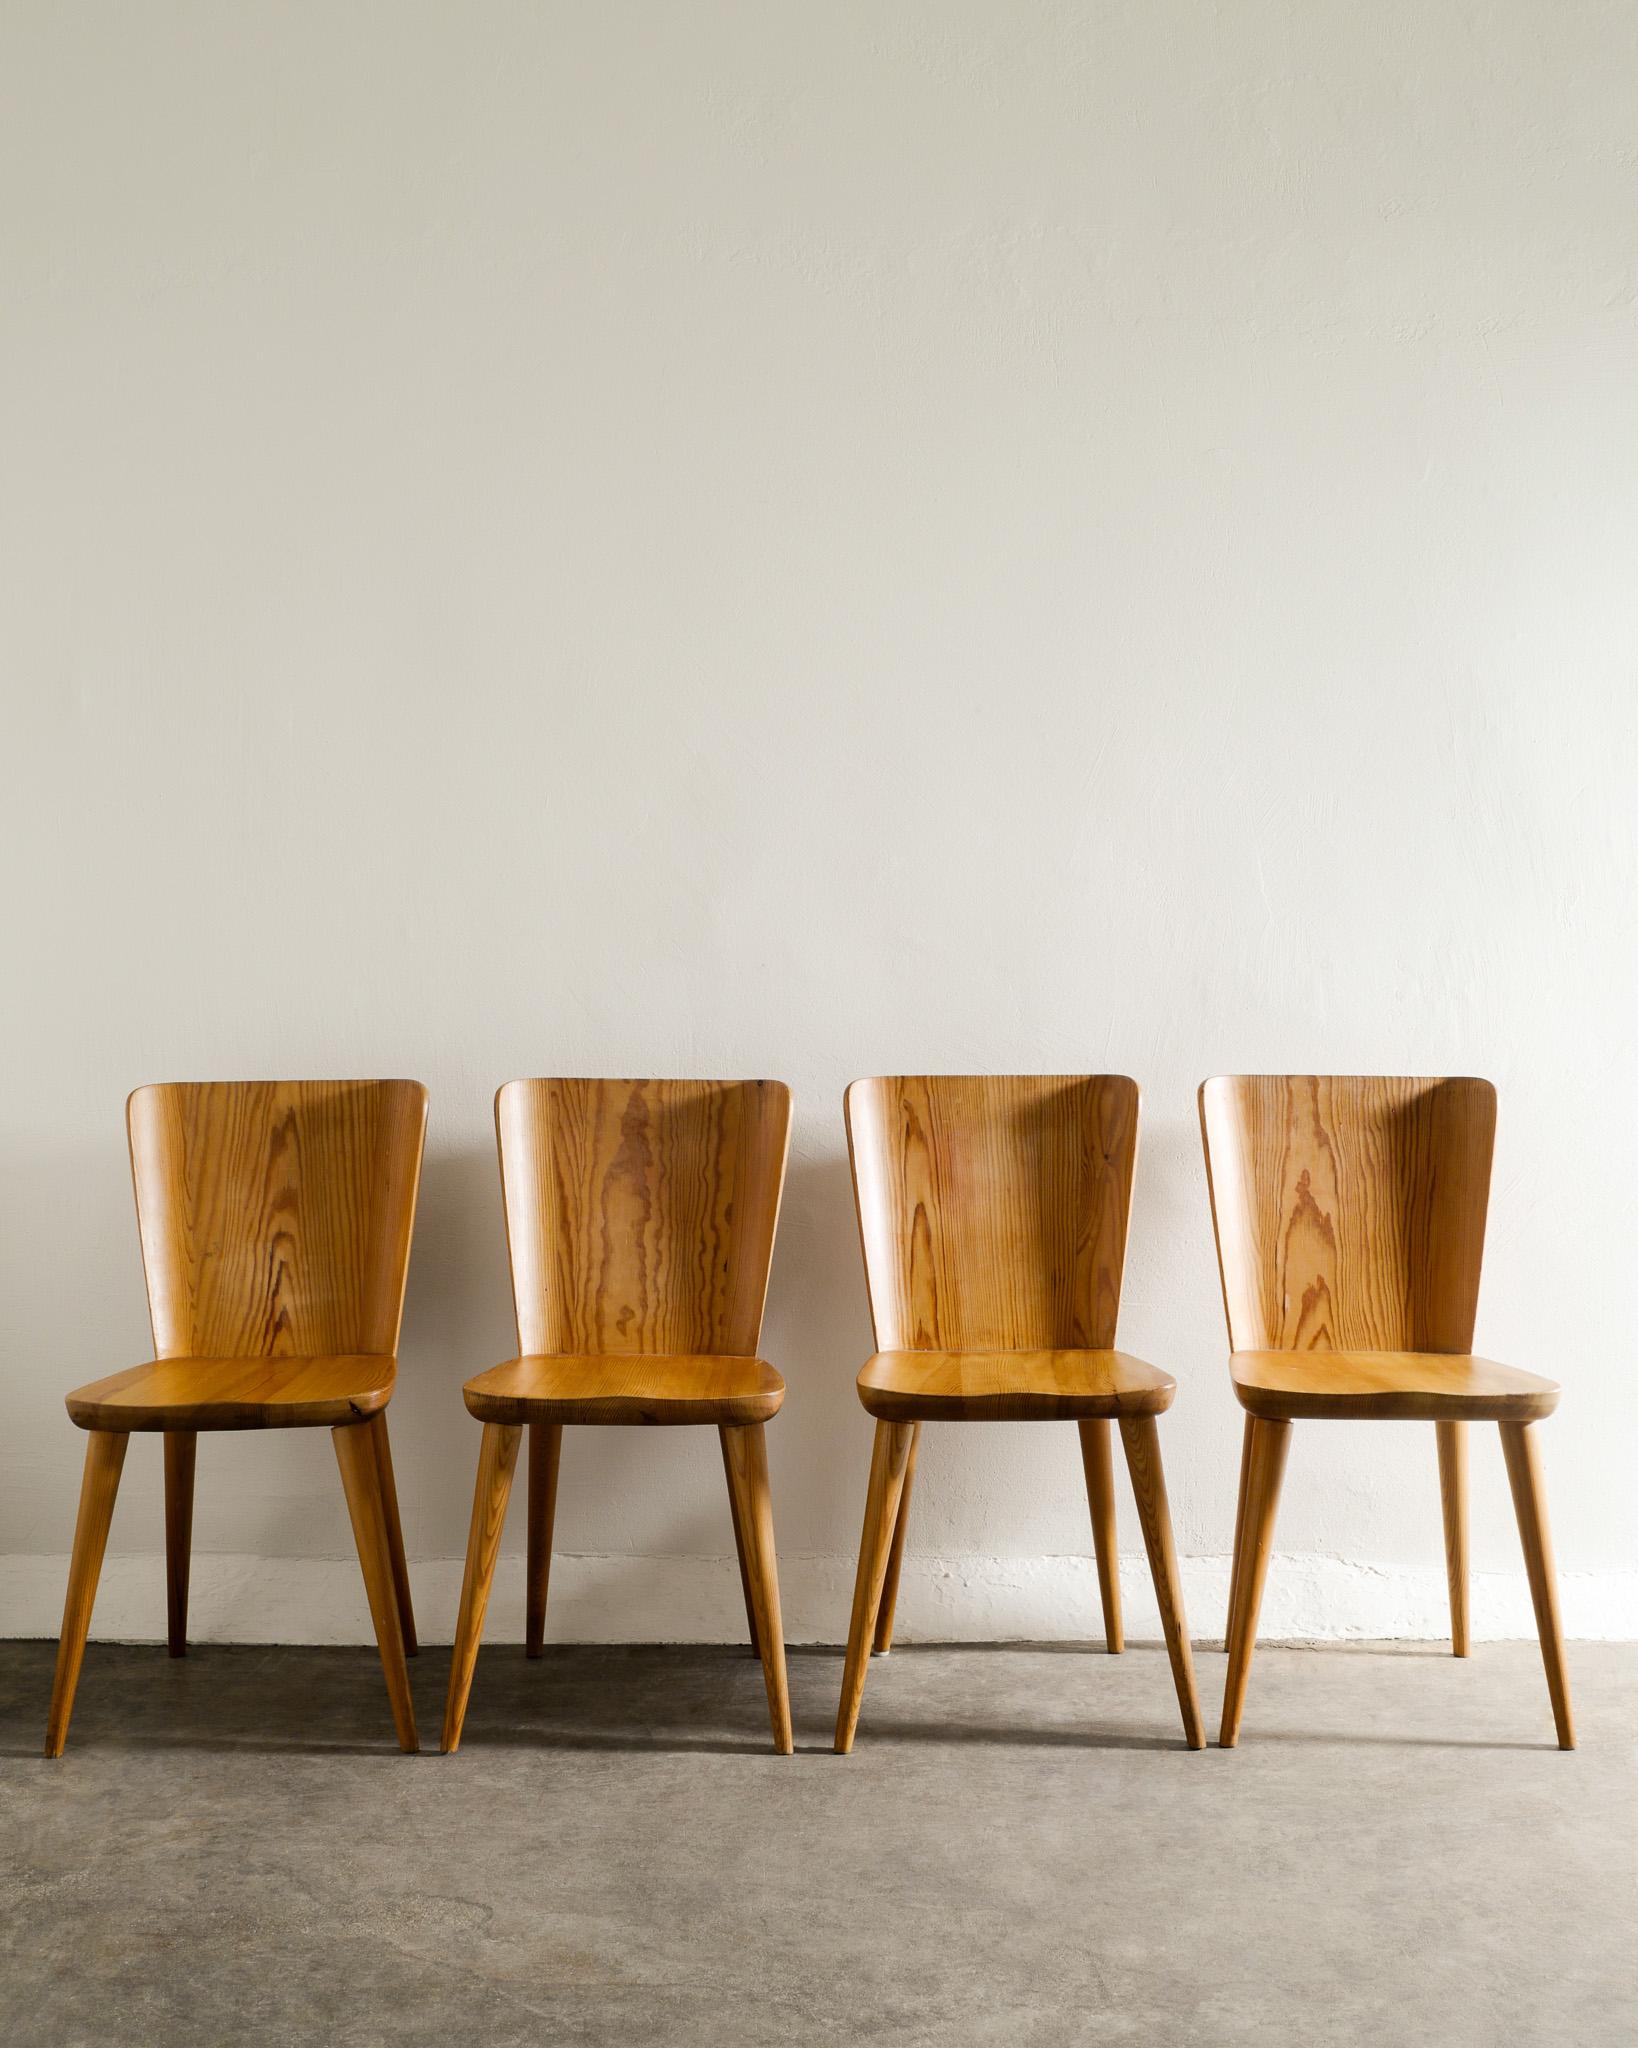 Rare set of four mid century dining chairs in pine by Göran Malmvall produced by Svensk Fur, 1940s. In good original and matching condition. 
All chairs are stable and have been gone through by our professional.

Dimensions: H: 80 cm / 31.5